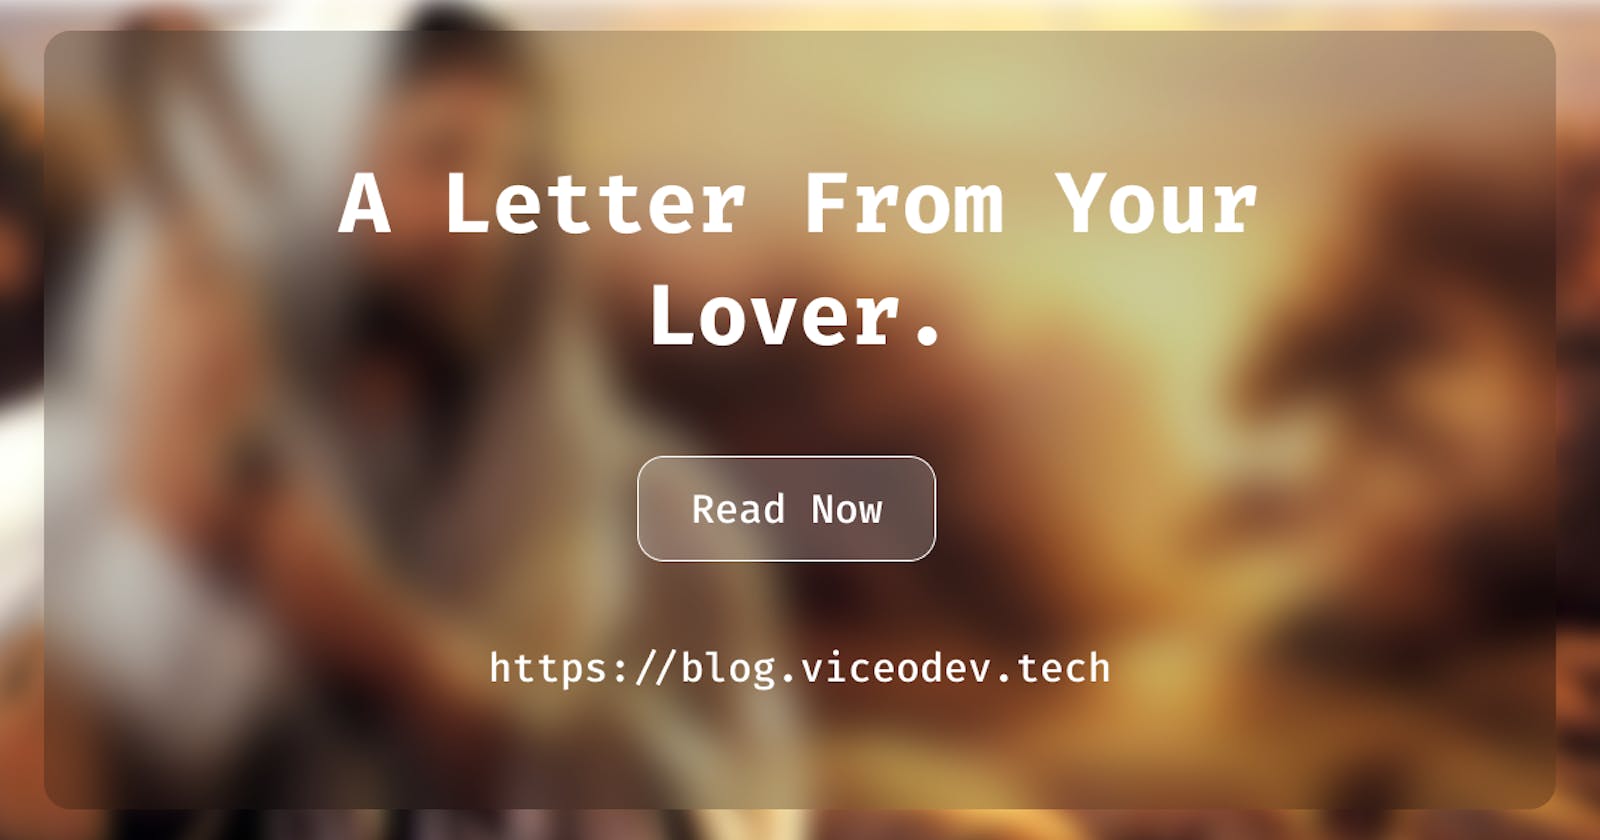 A Letter From Your Lover.